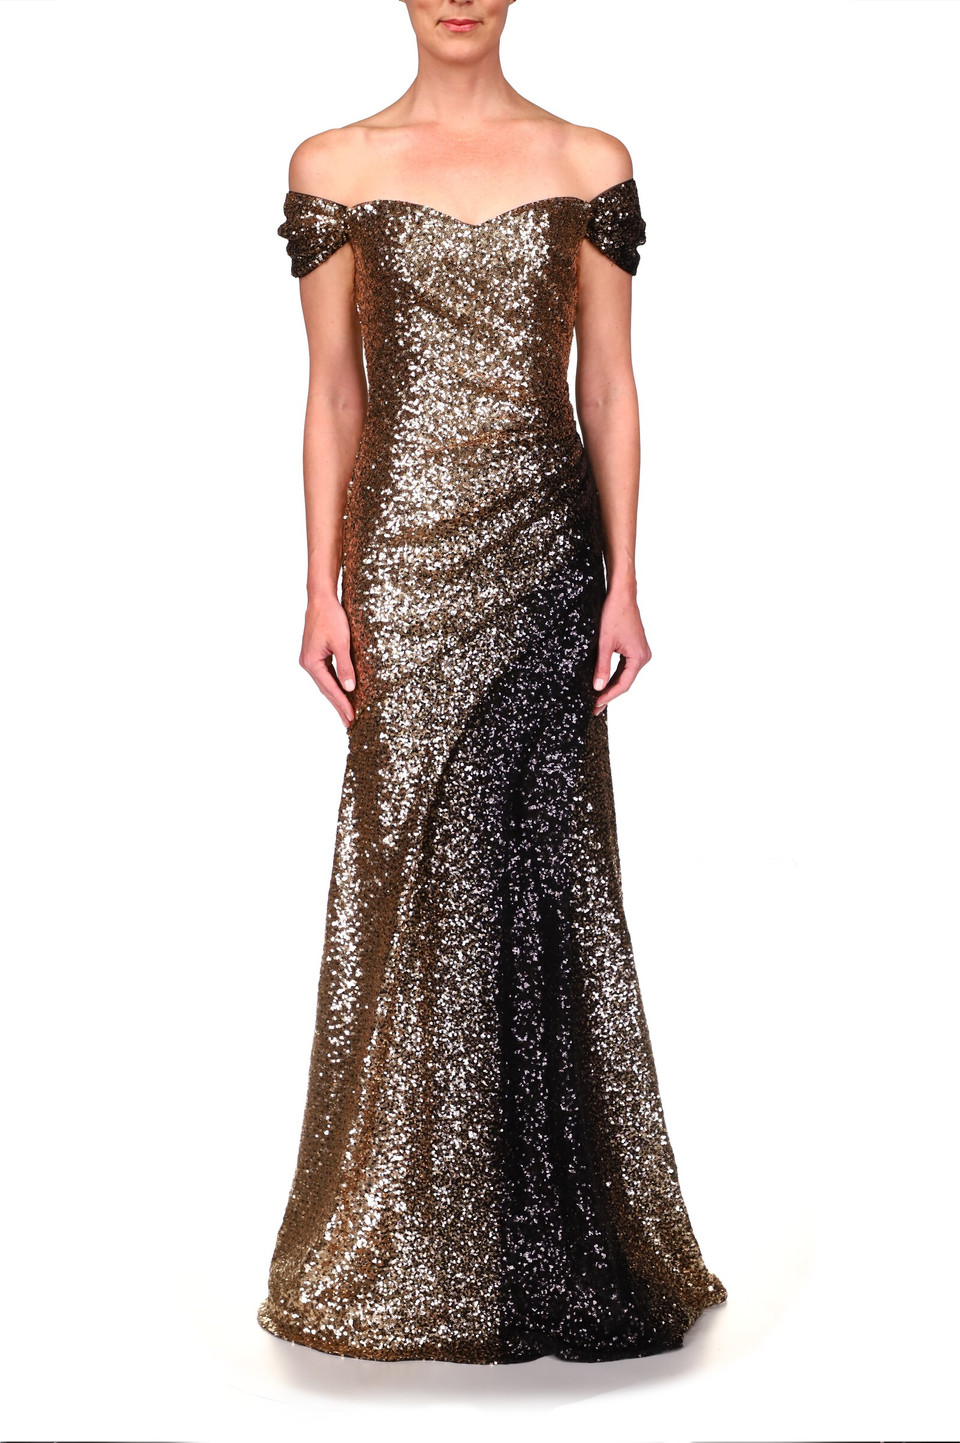 Gold to Black Ombré Sequin Gown by Badgley Mischka